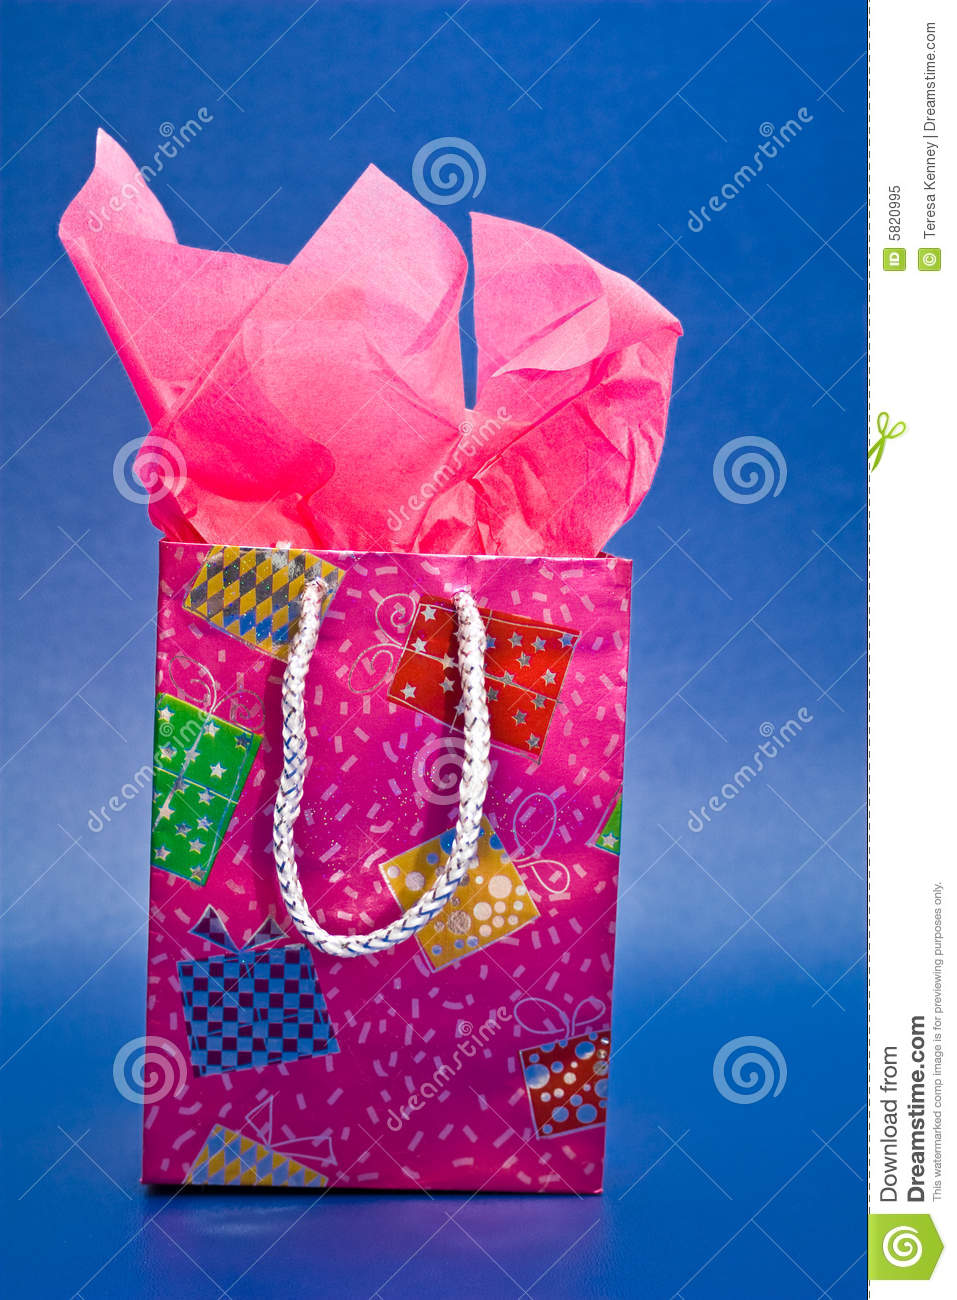 Pink Gift Bag And Paper Royalty Free Stock Photo   Image  5820995